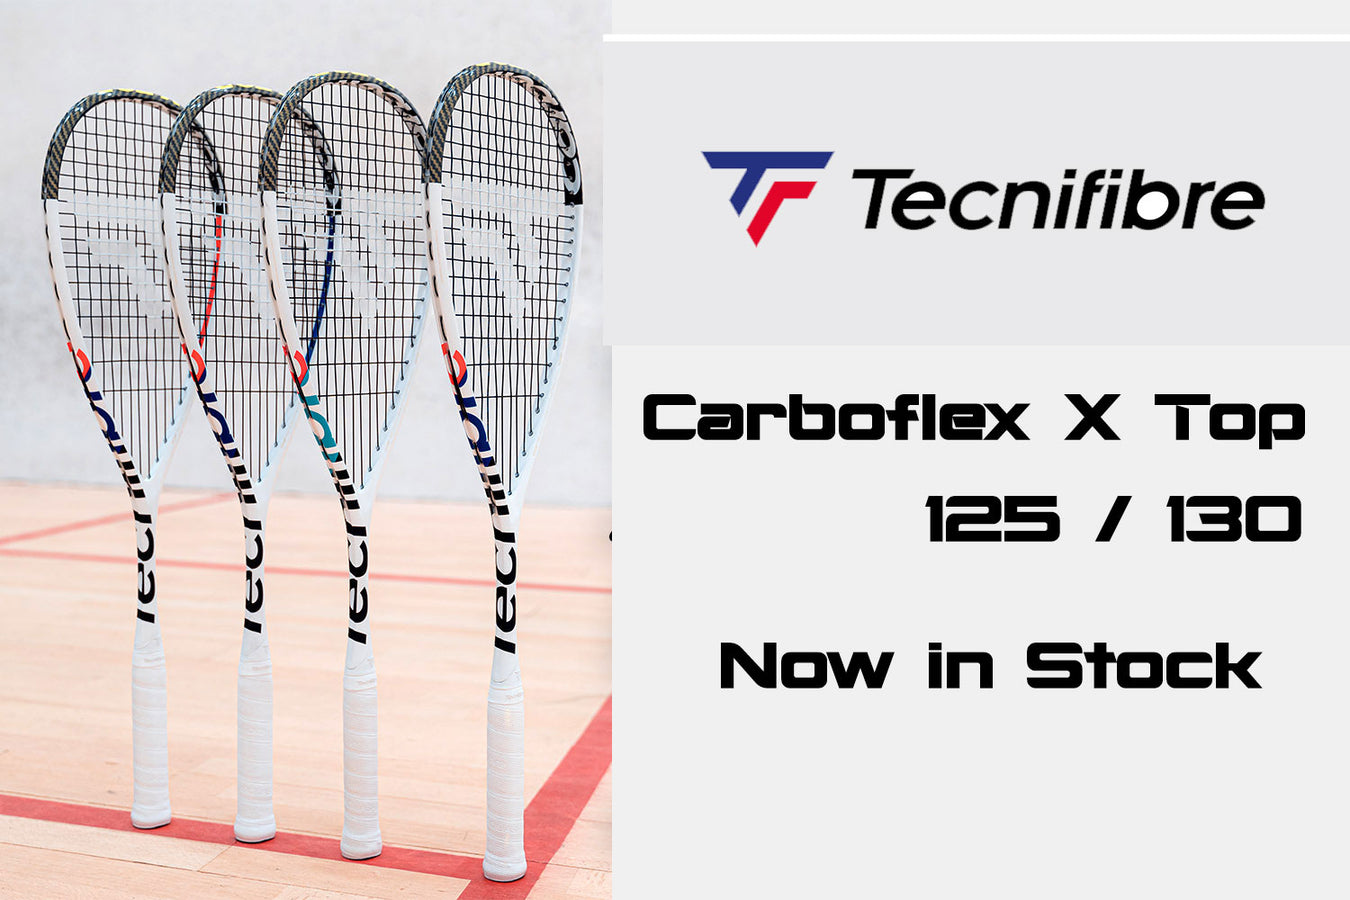 Picture of Tecnifibre carboflex xtop 125 130 squash racquets now in stock at racquet science in ontario canada